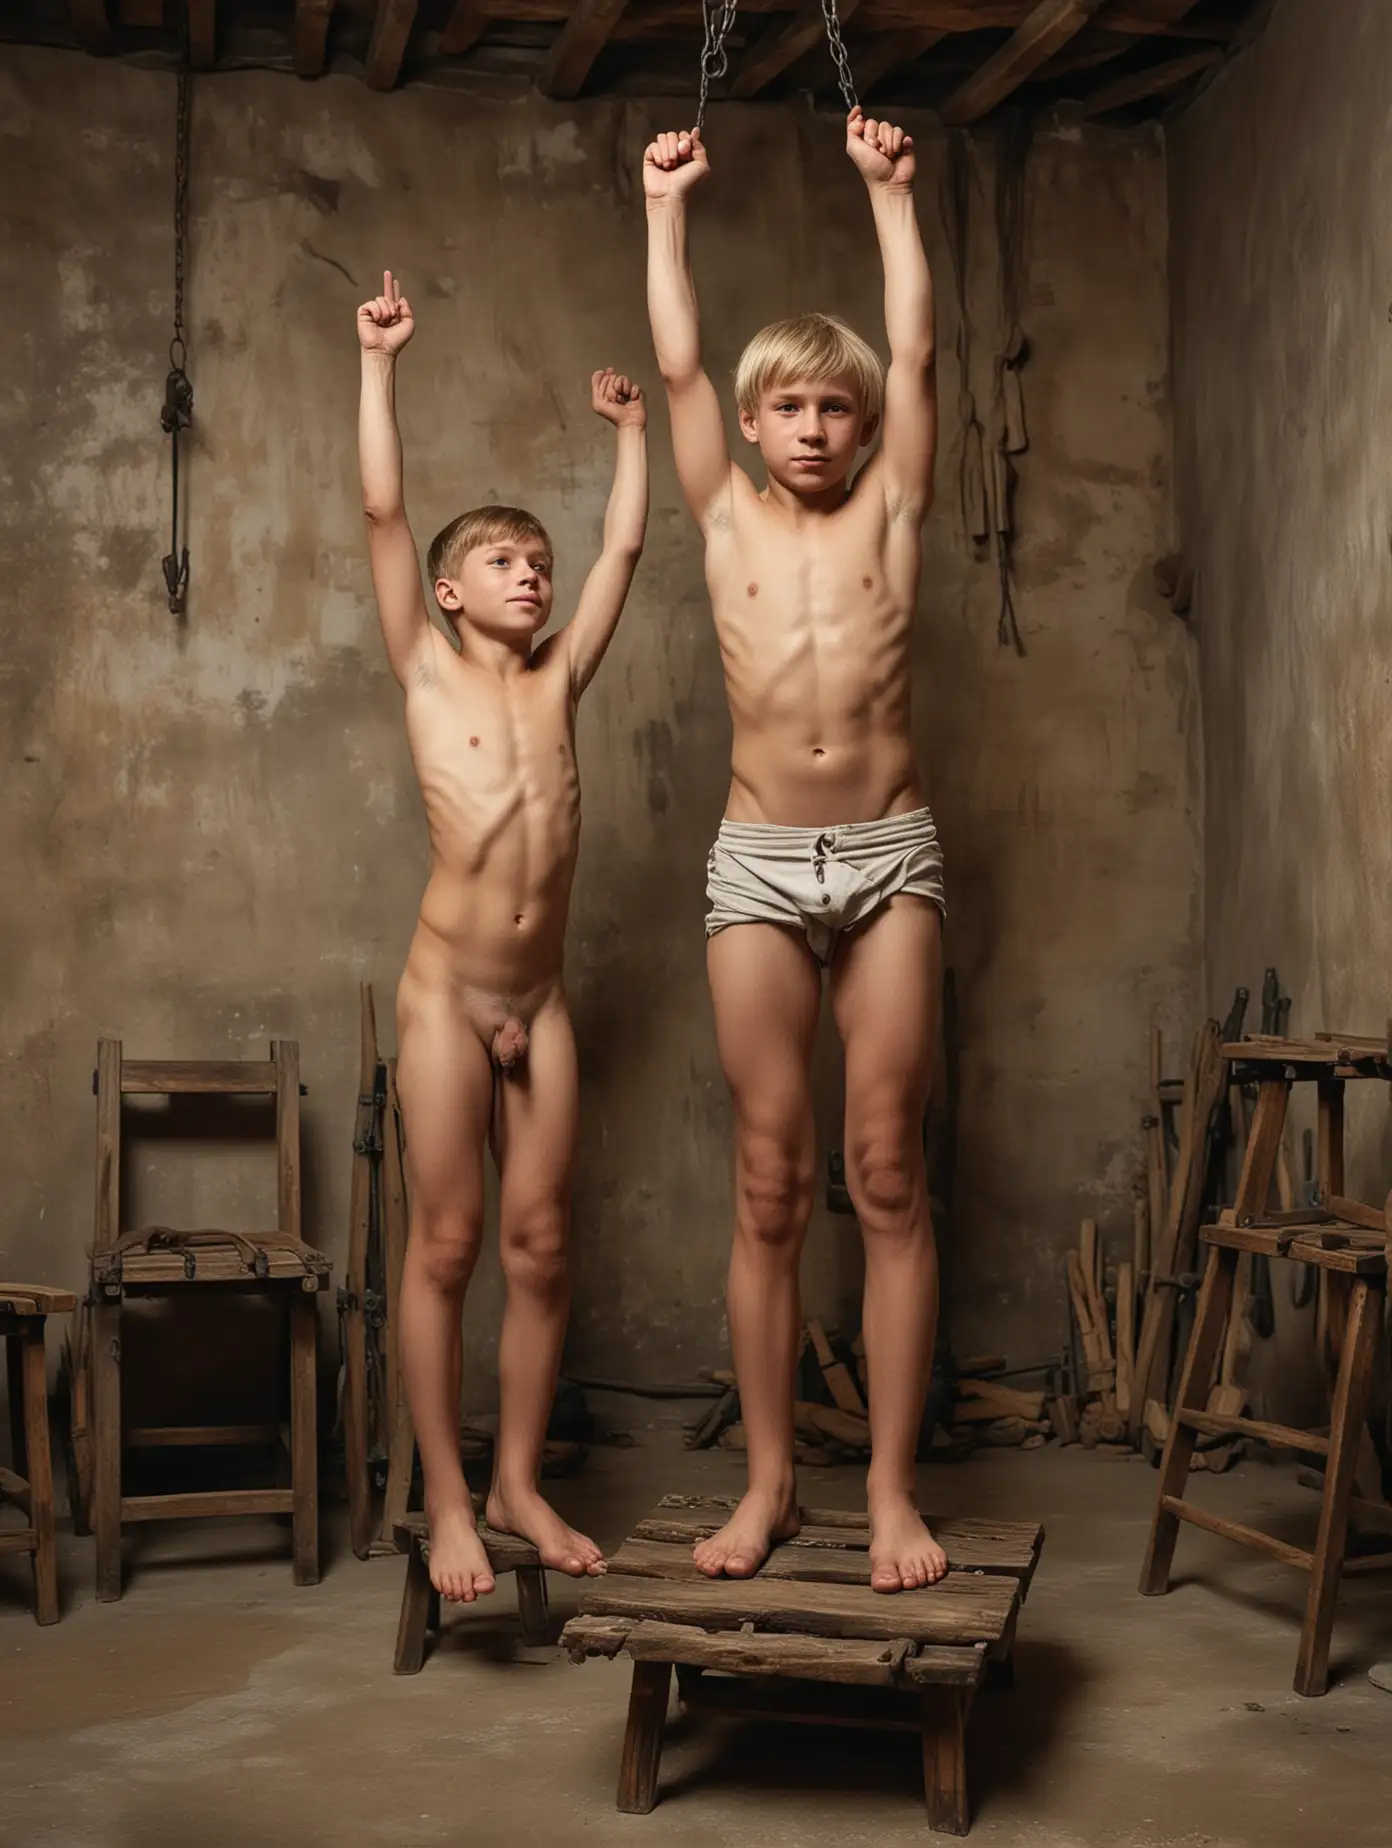 A realistic photo of a 13 years old shirtless, barefooted blonde Russian boy stands with holding his hands up in the air,  waiting for getting hanged by enemy soldiers in a dungeons, face scared with tears facing to the front, He doesn't wear any clothes except his briefs. Front view, wide-range view, feet visible, on left side a stool and a hangman noos hangs from the ceiling